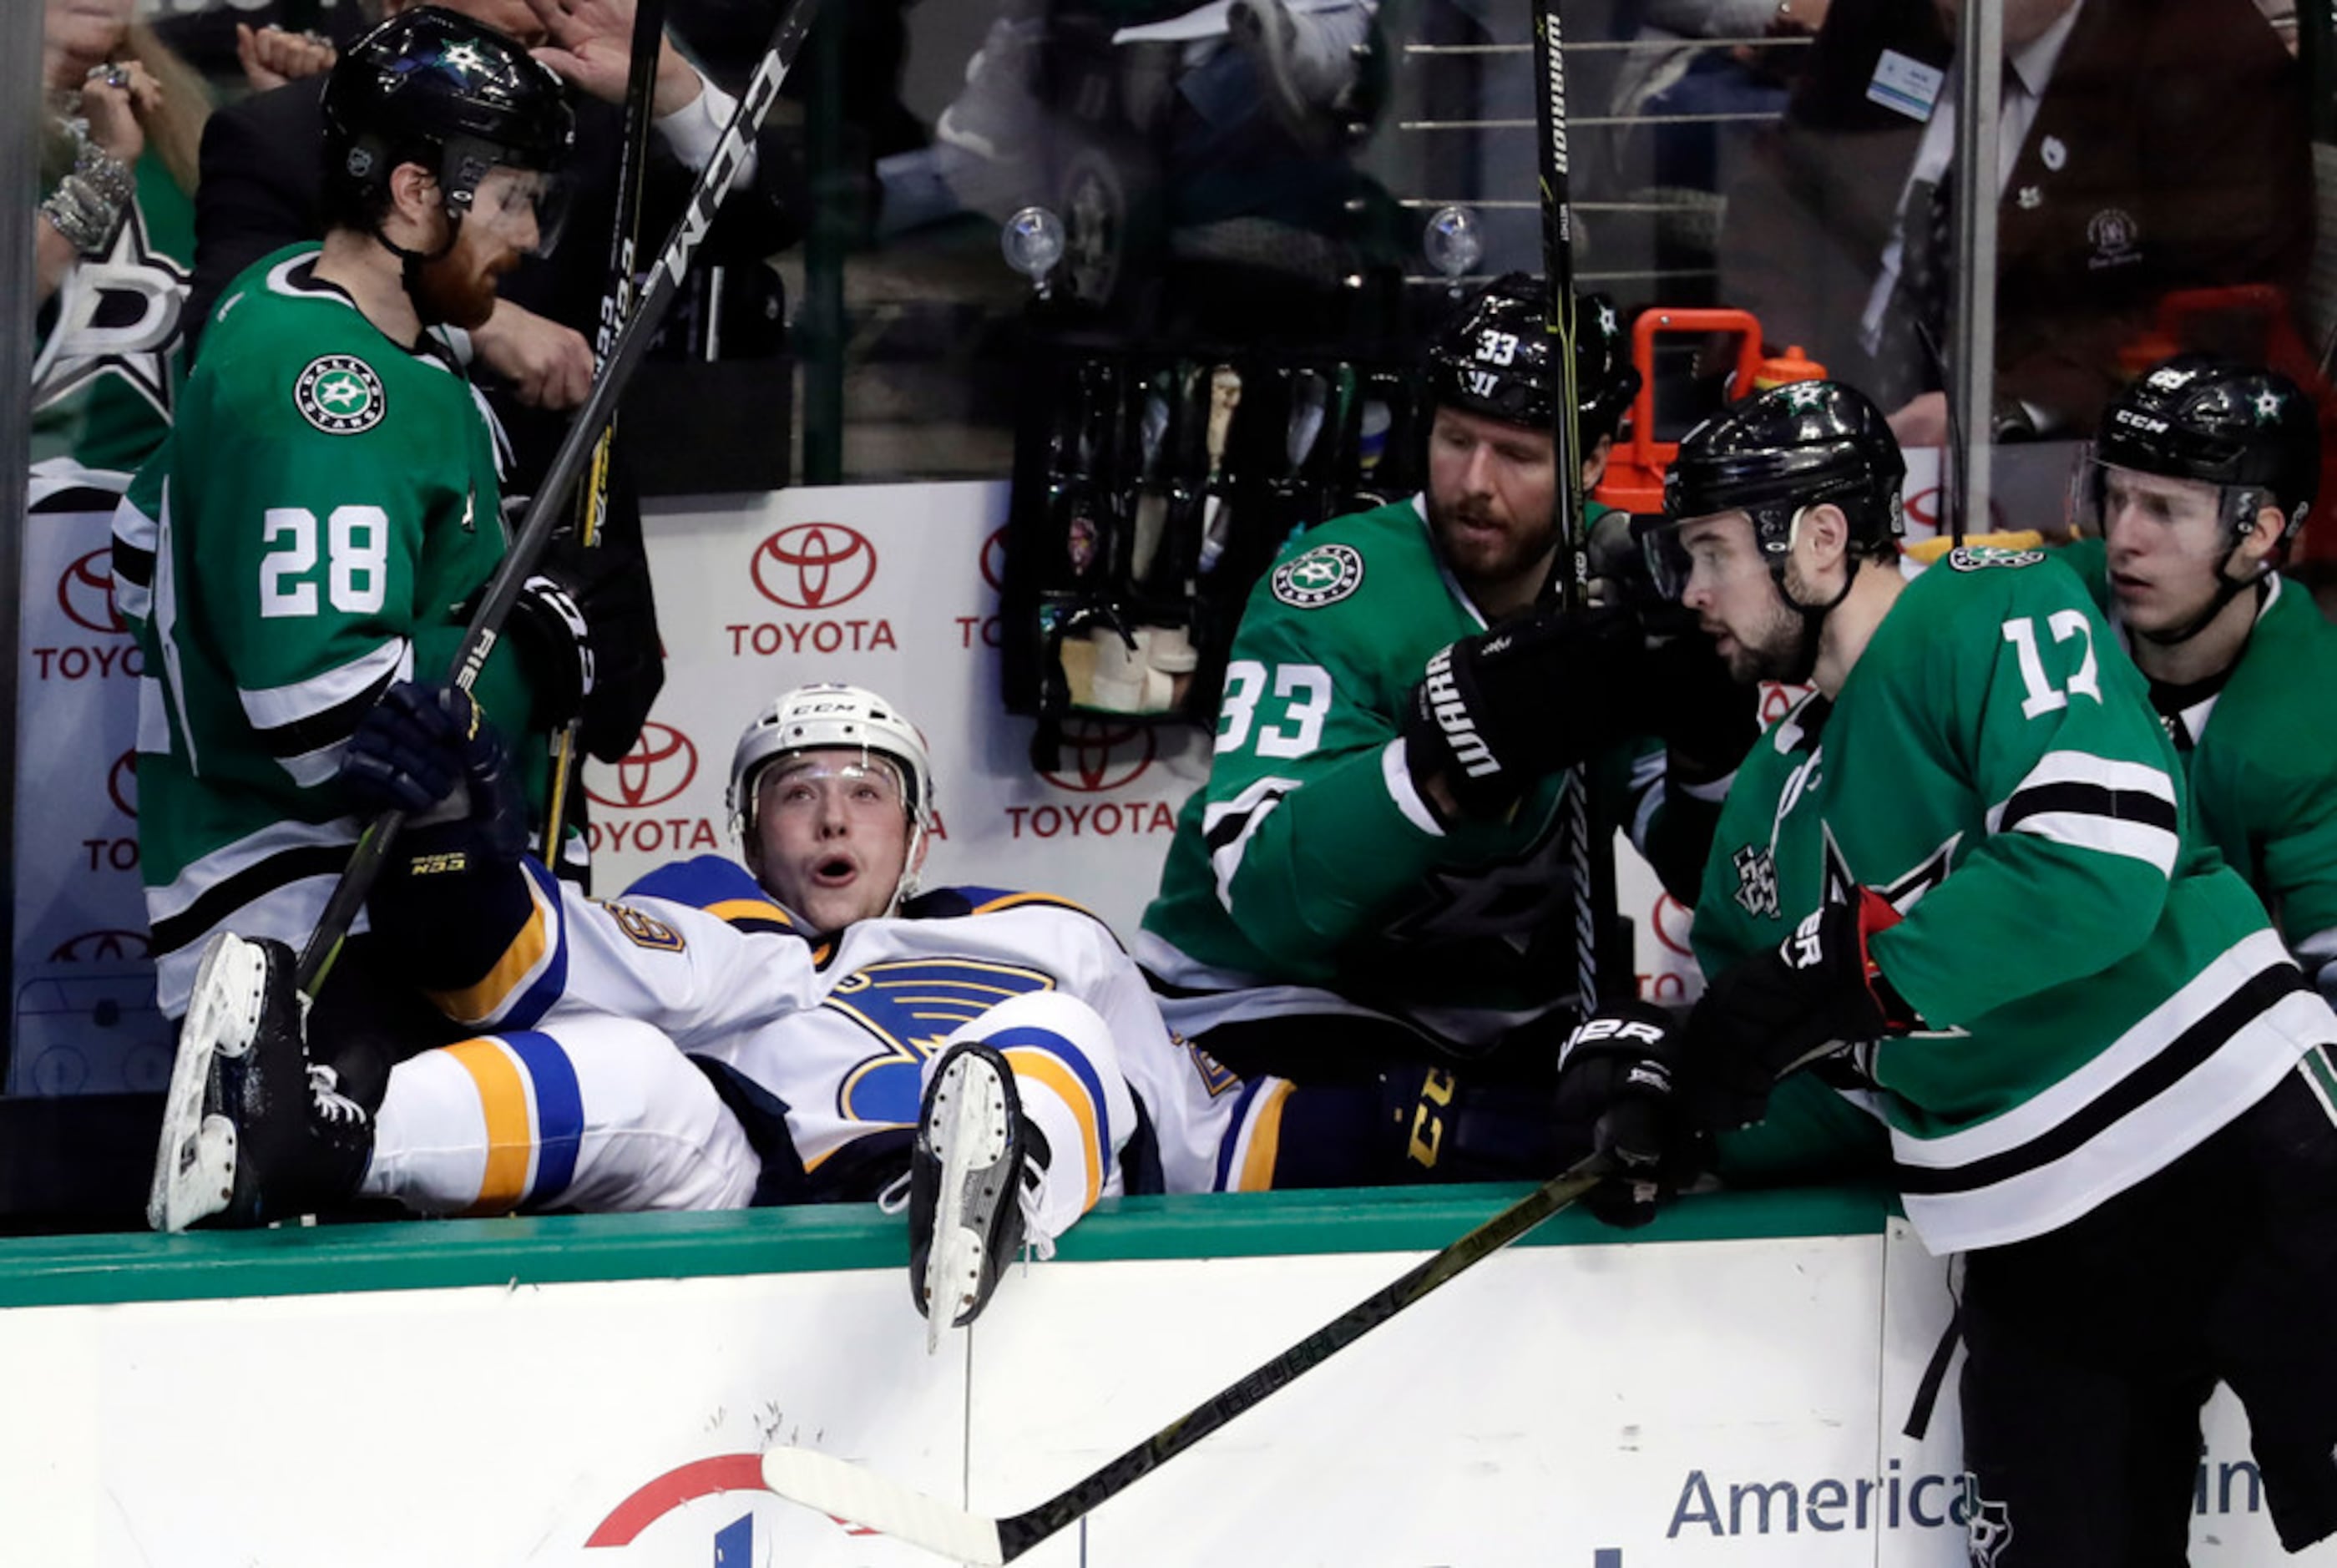 St. Louis Blues: It's more about when than will with Vince Dunn